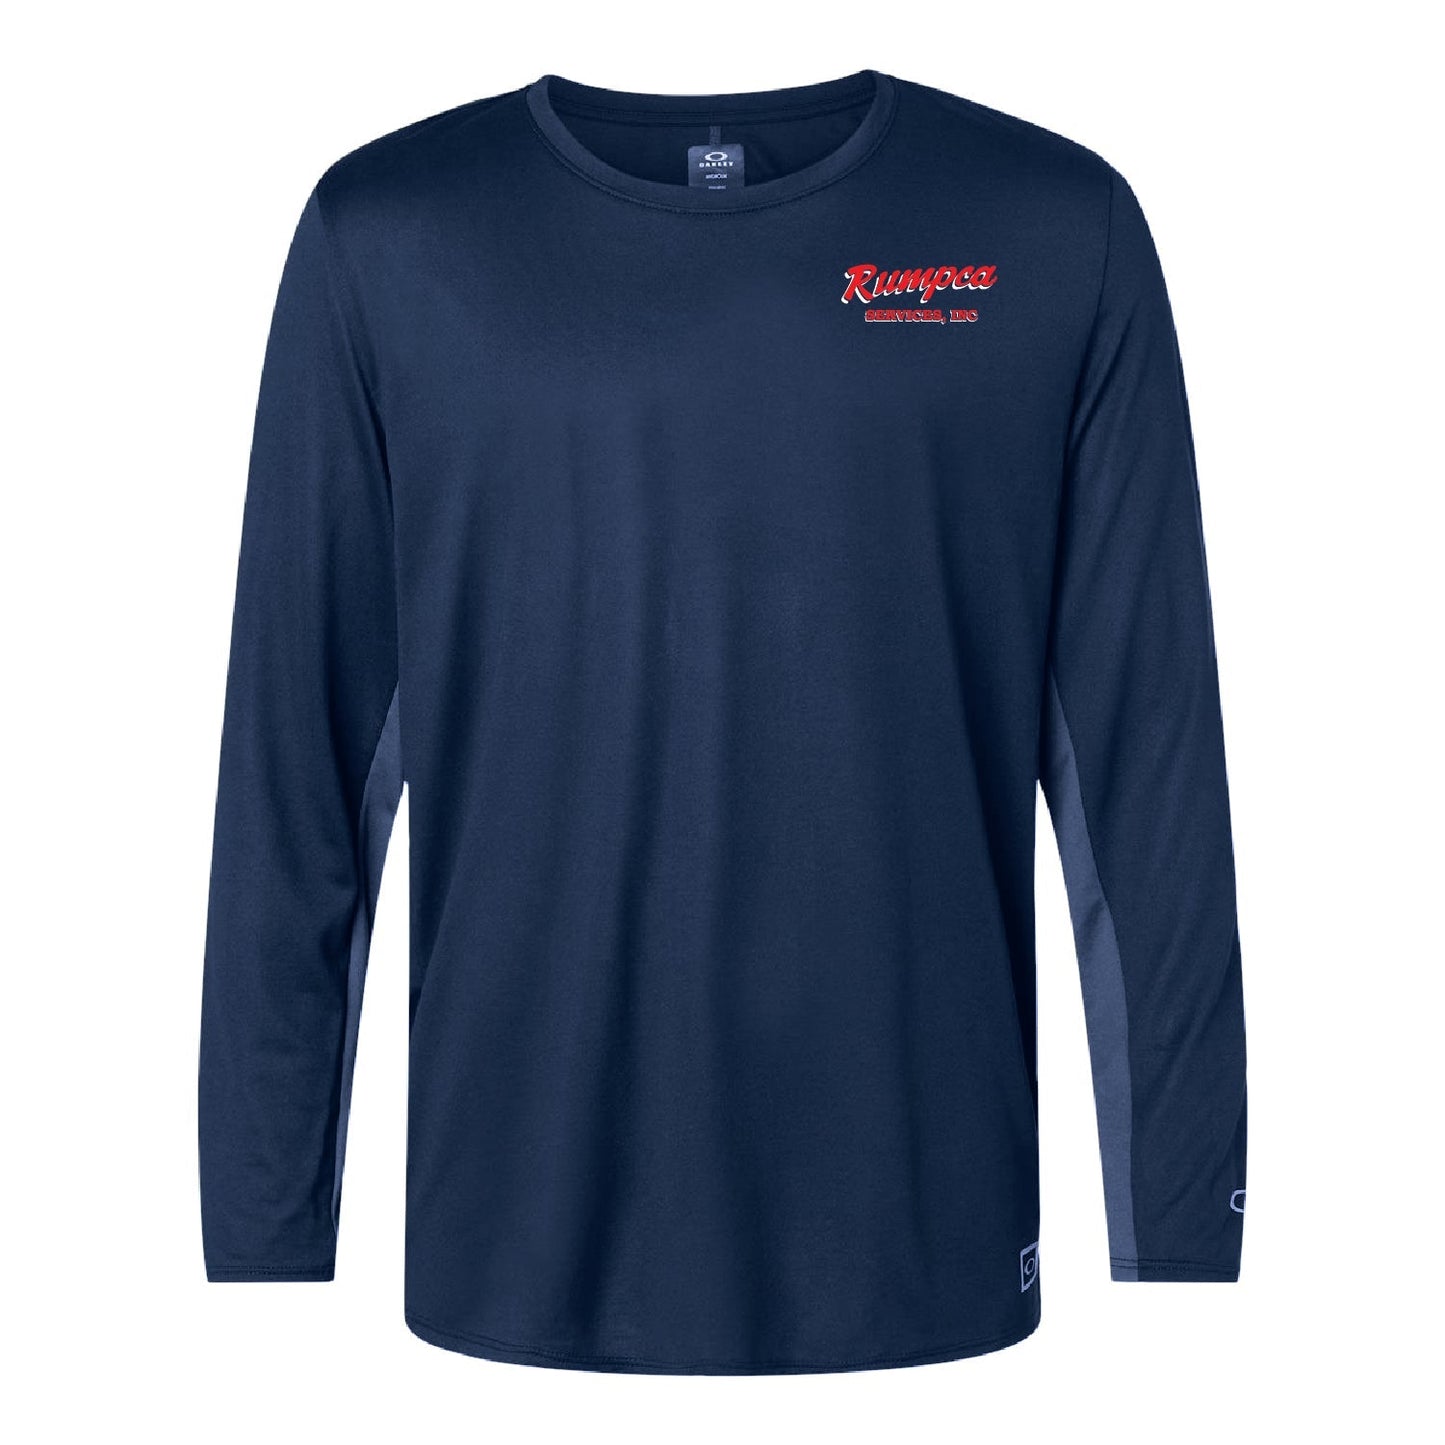 Rumpca Services Team Issue Hydrolix Long Sleeve T-Shirt - DSP On Demand